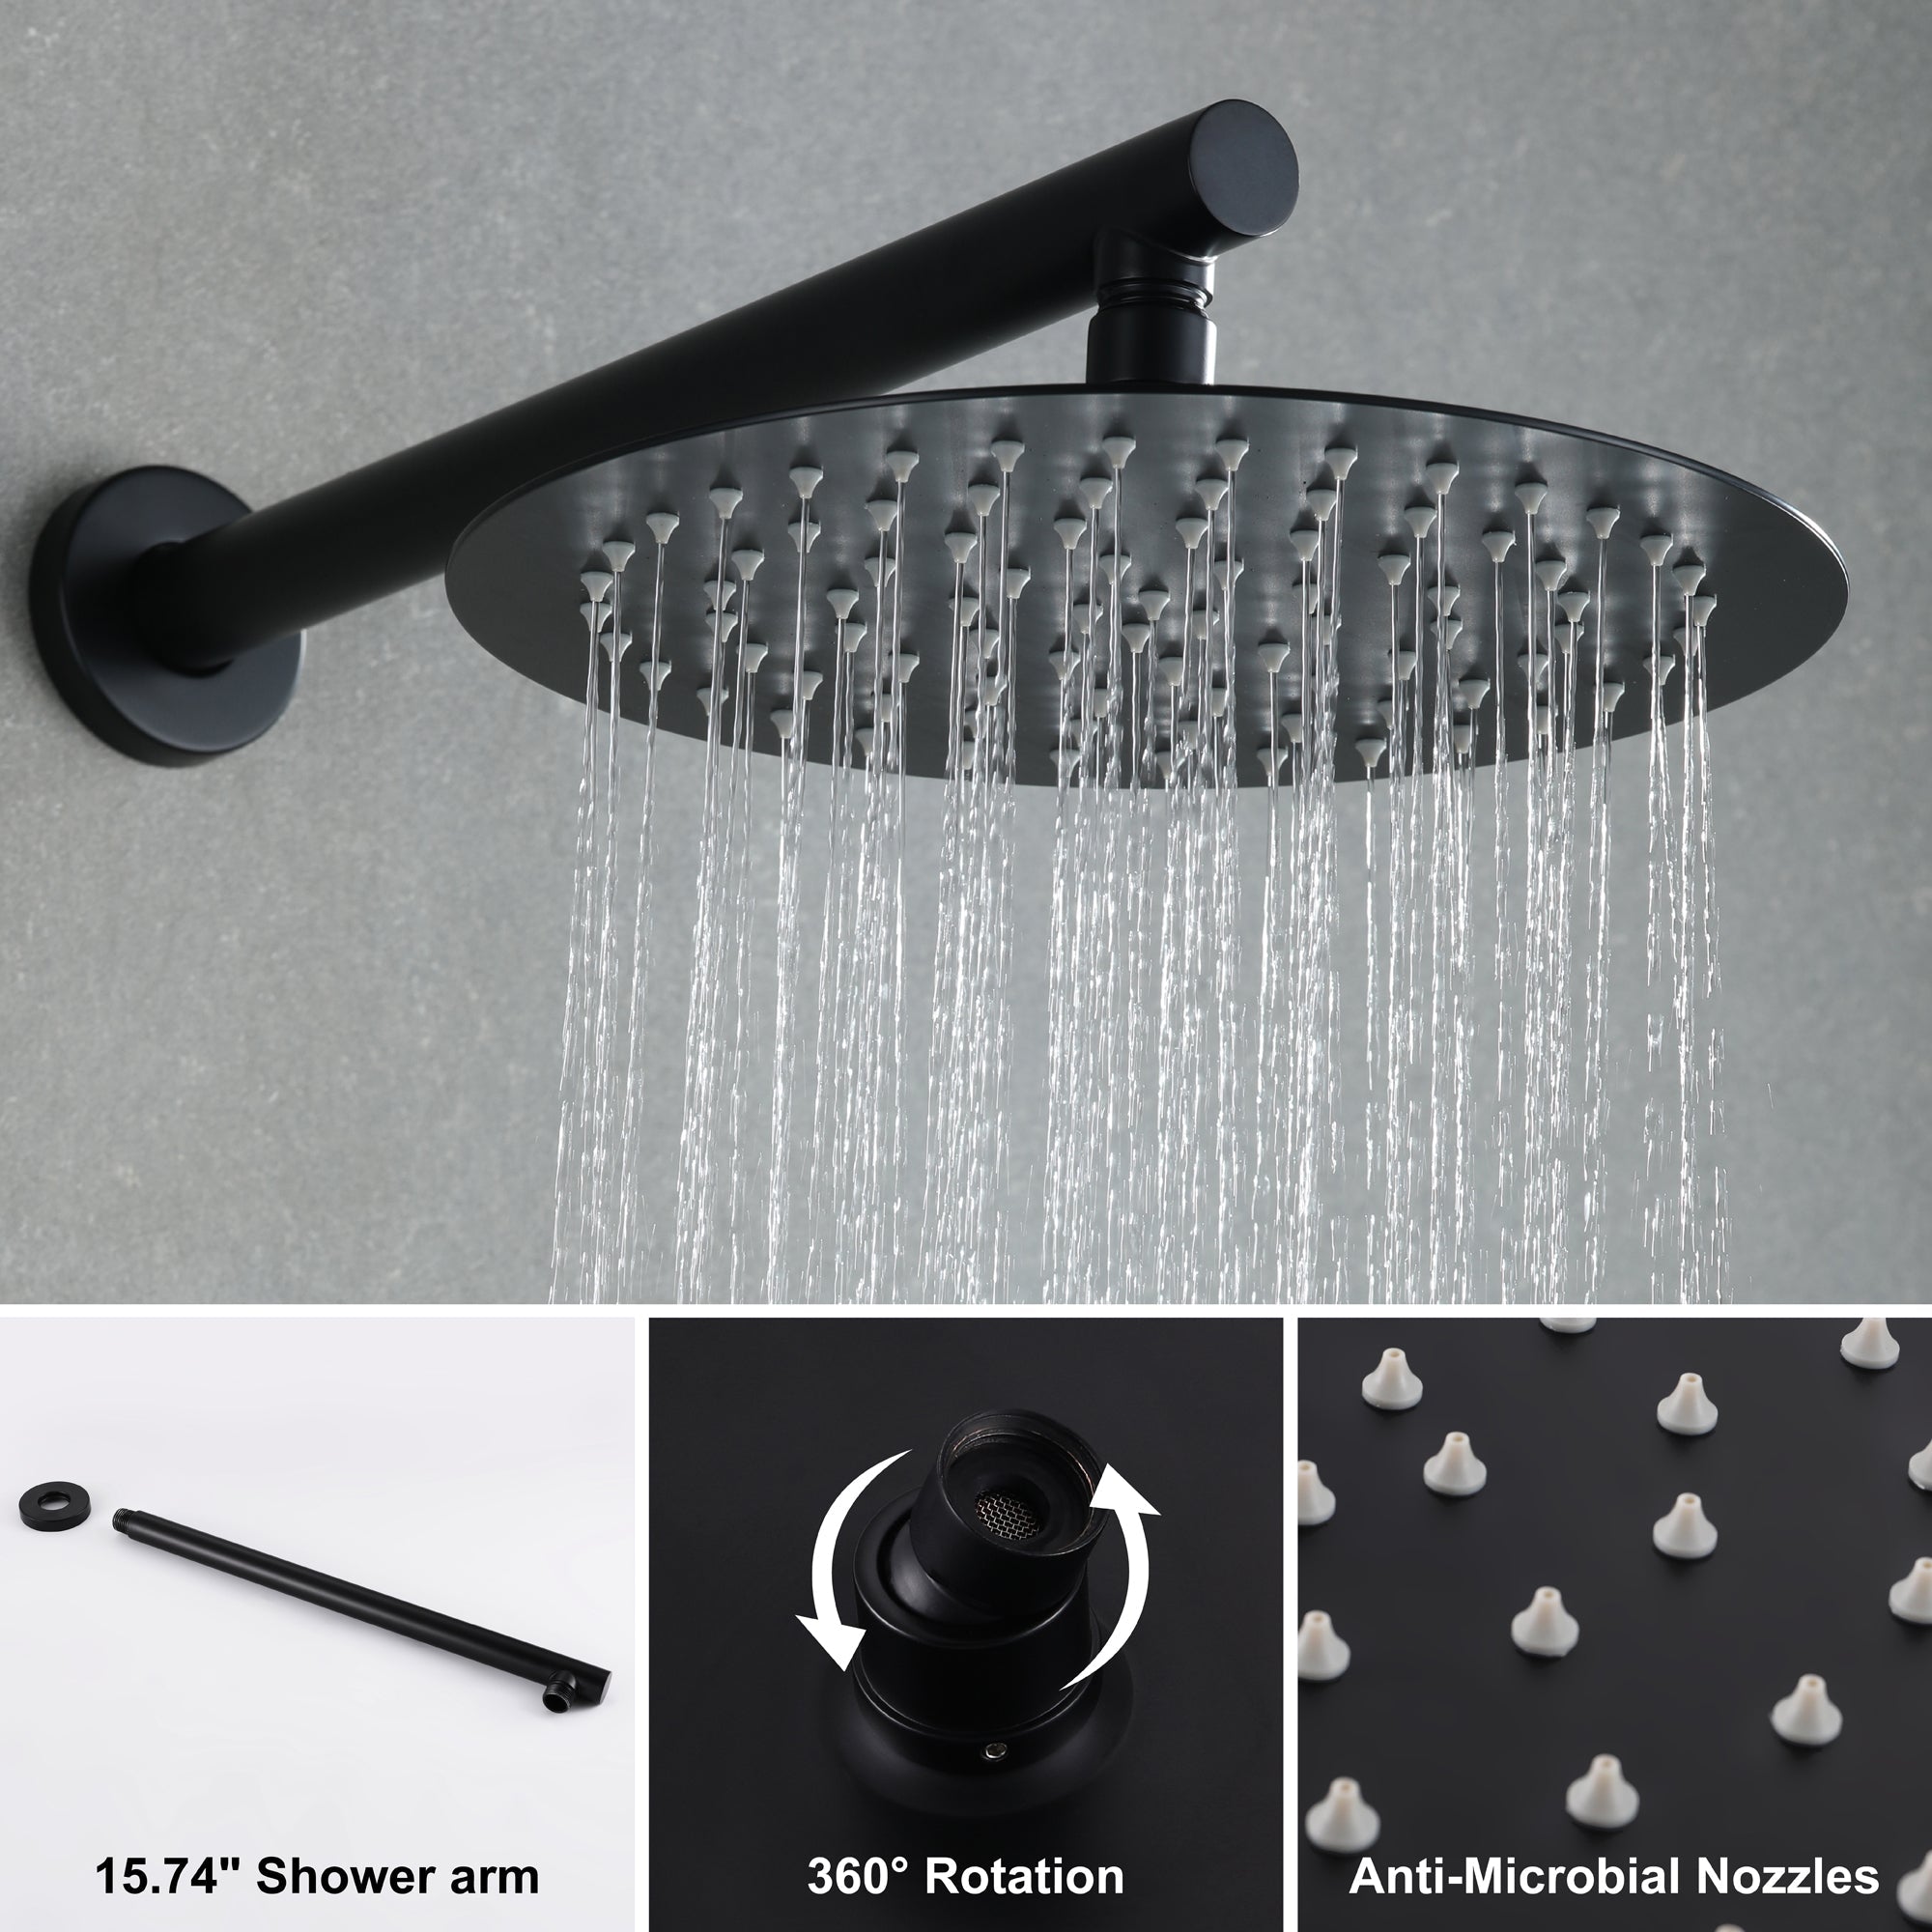 shower wall systems